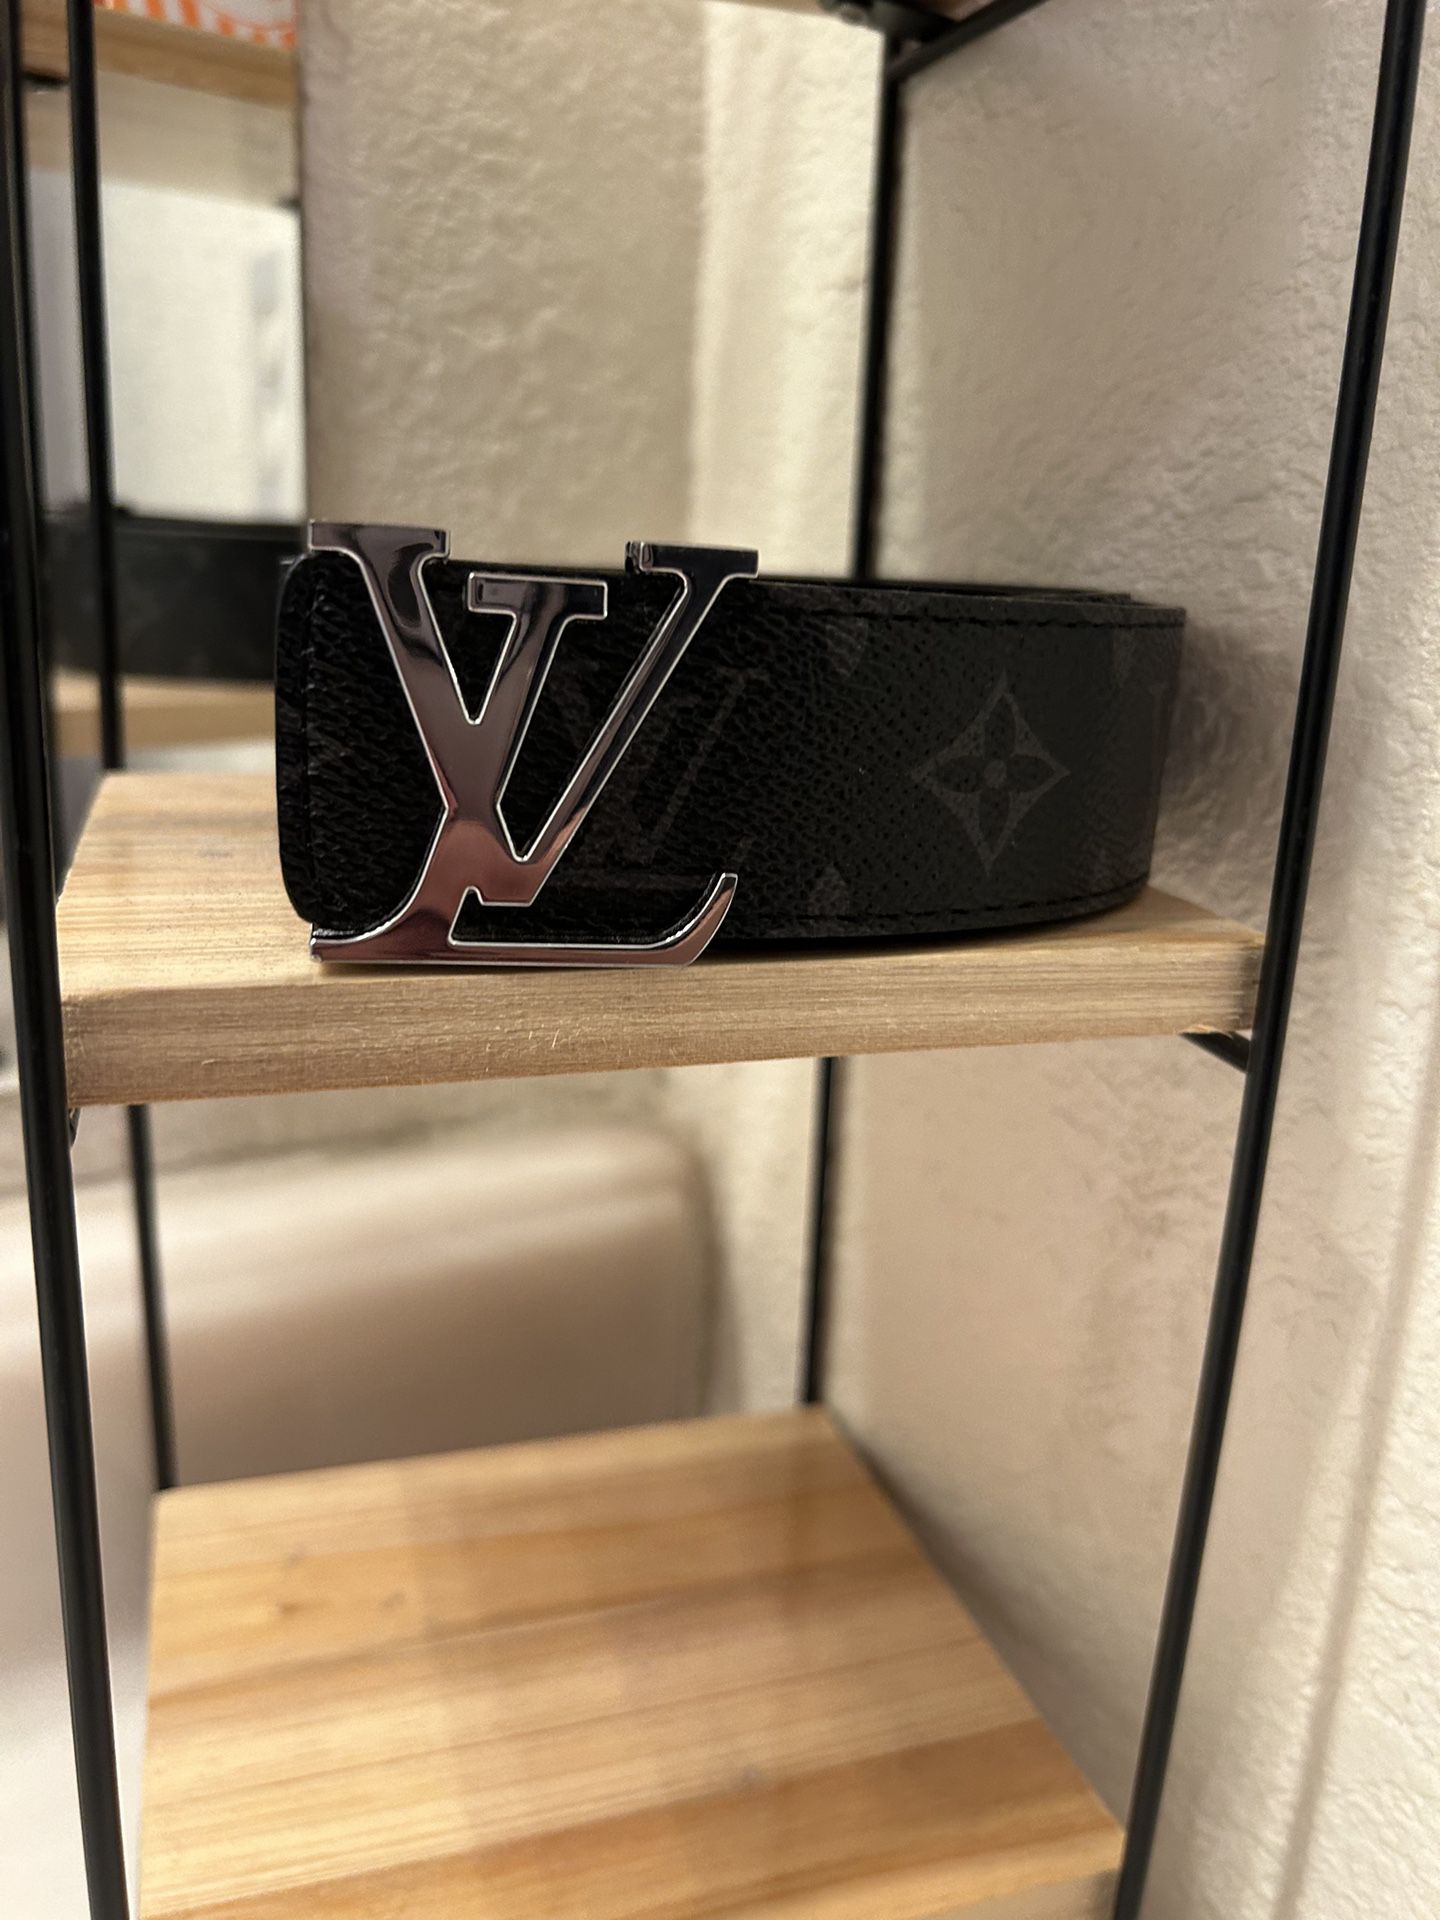 Louis Vuitton Black Belt Size 85/34 for Sale in Peck Slip, NY - OfferUp